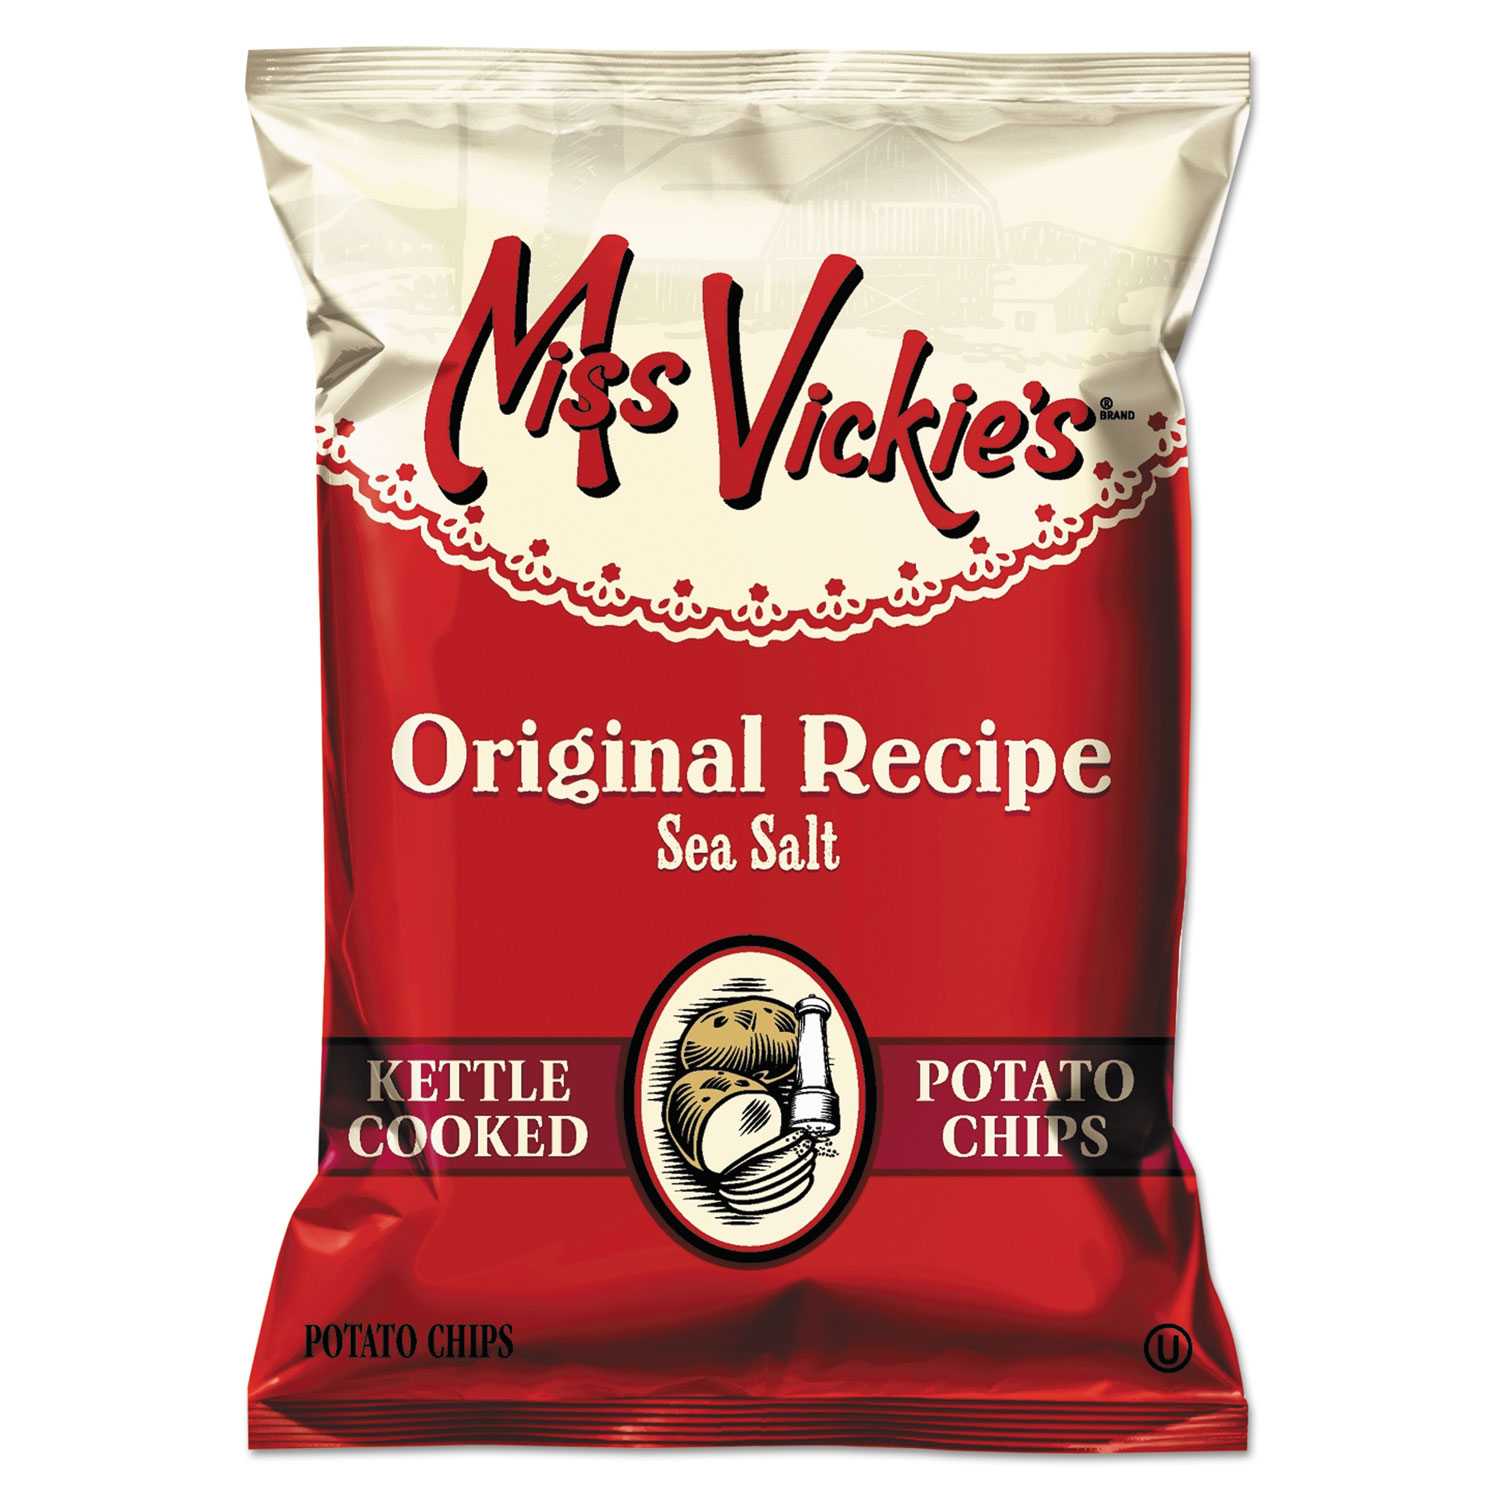  Miss Vickie's 44443 Kettle Cooked Sea Salt Potato Chips, 1.375 oz Bag, 64/Carton (LAY44443) 